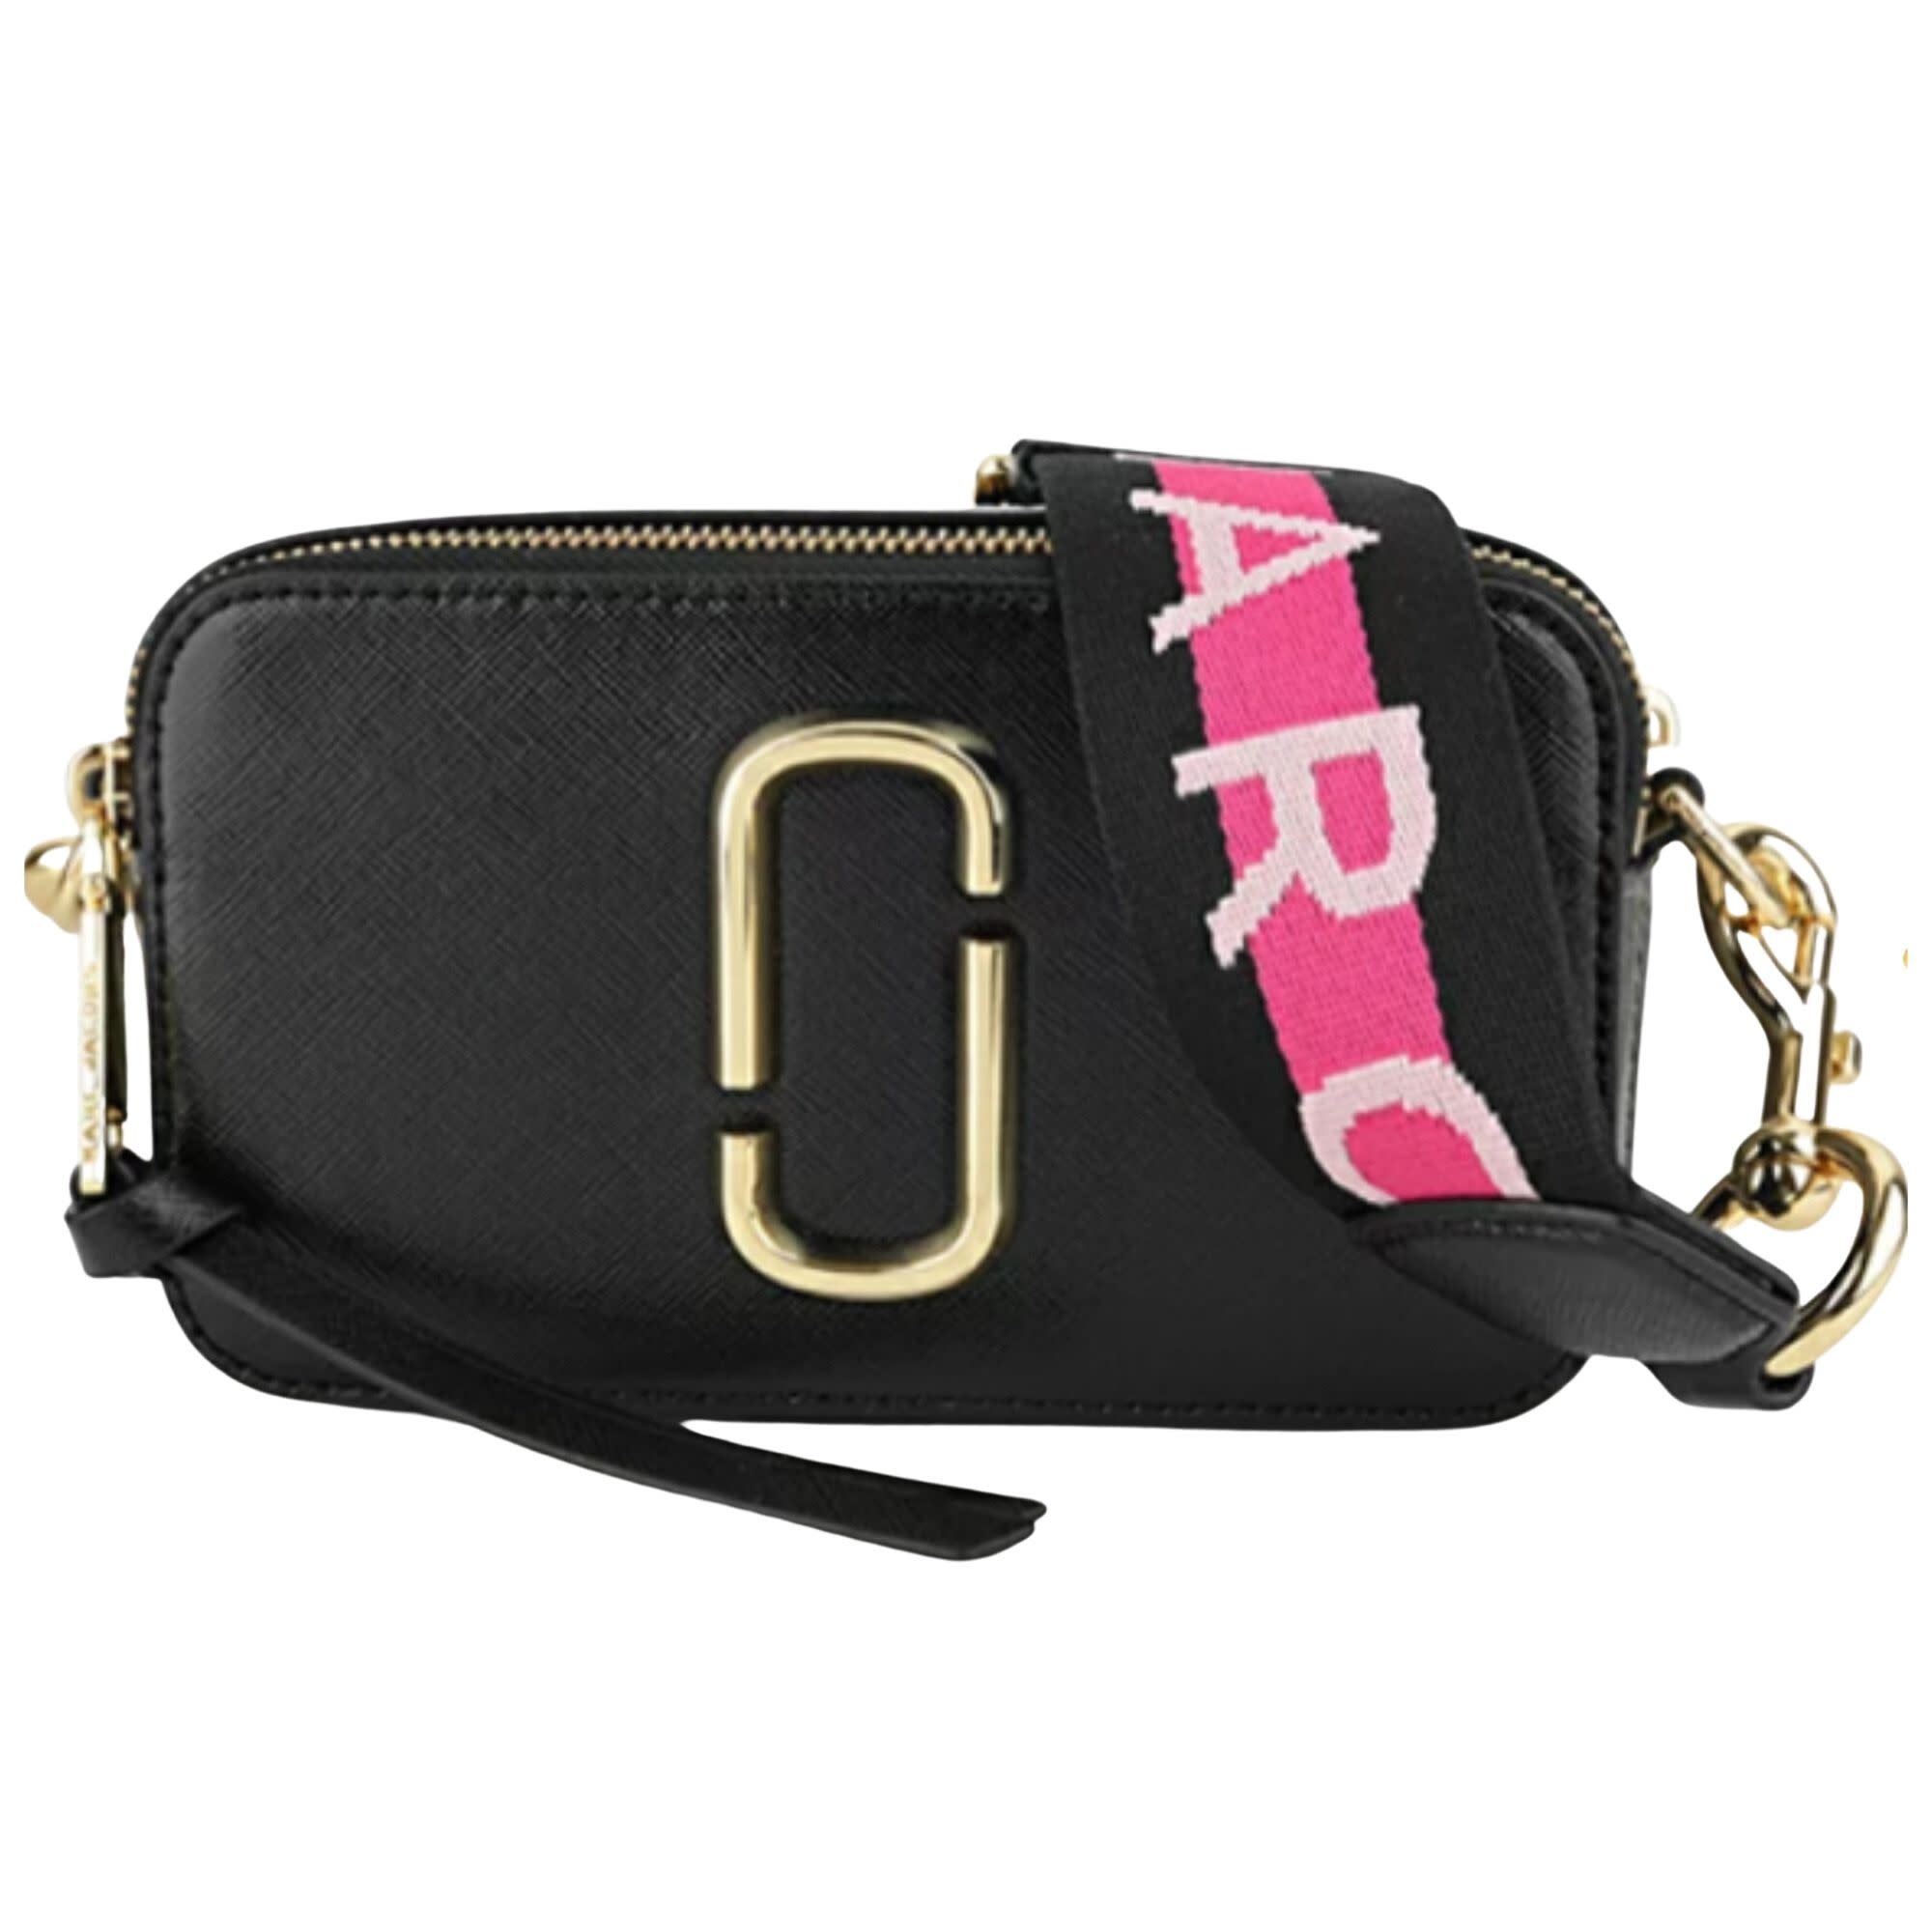 Snapshot of Marc Jacobs - Dark and light pink colored bag made of leather  with shoulder strap for women